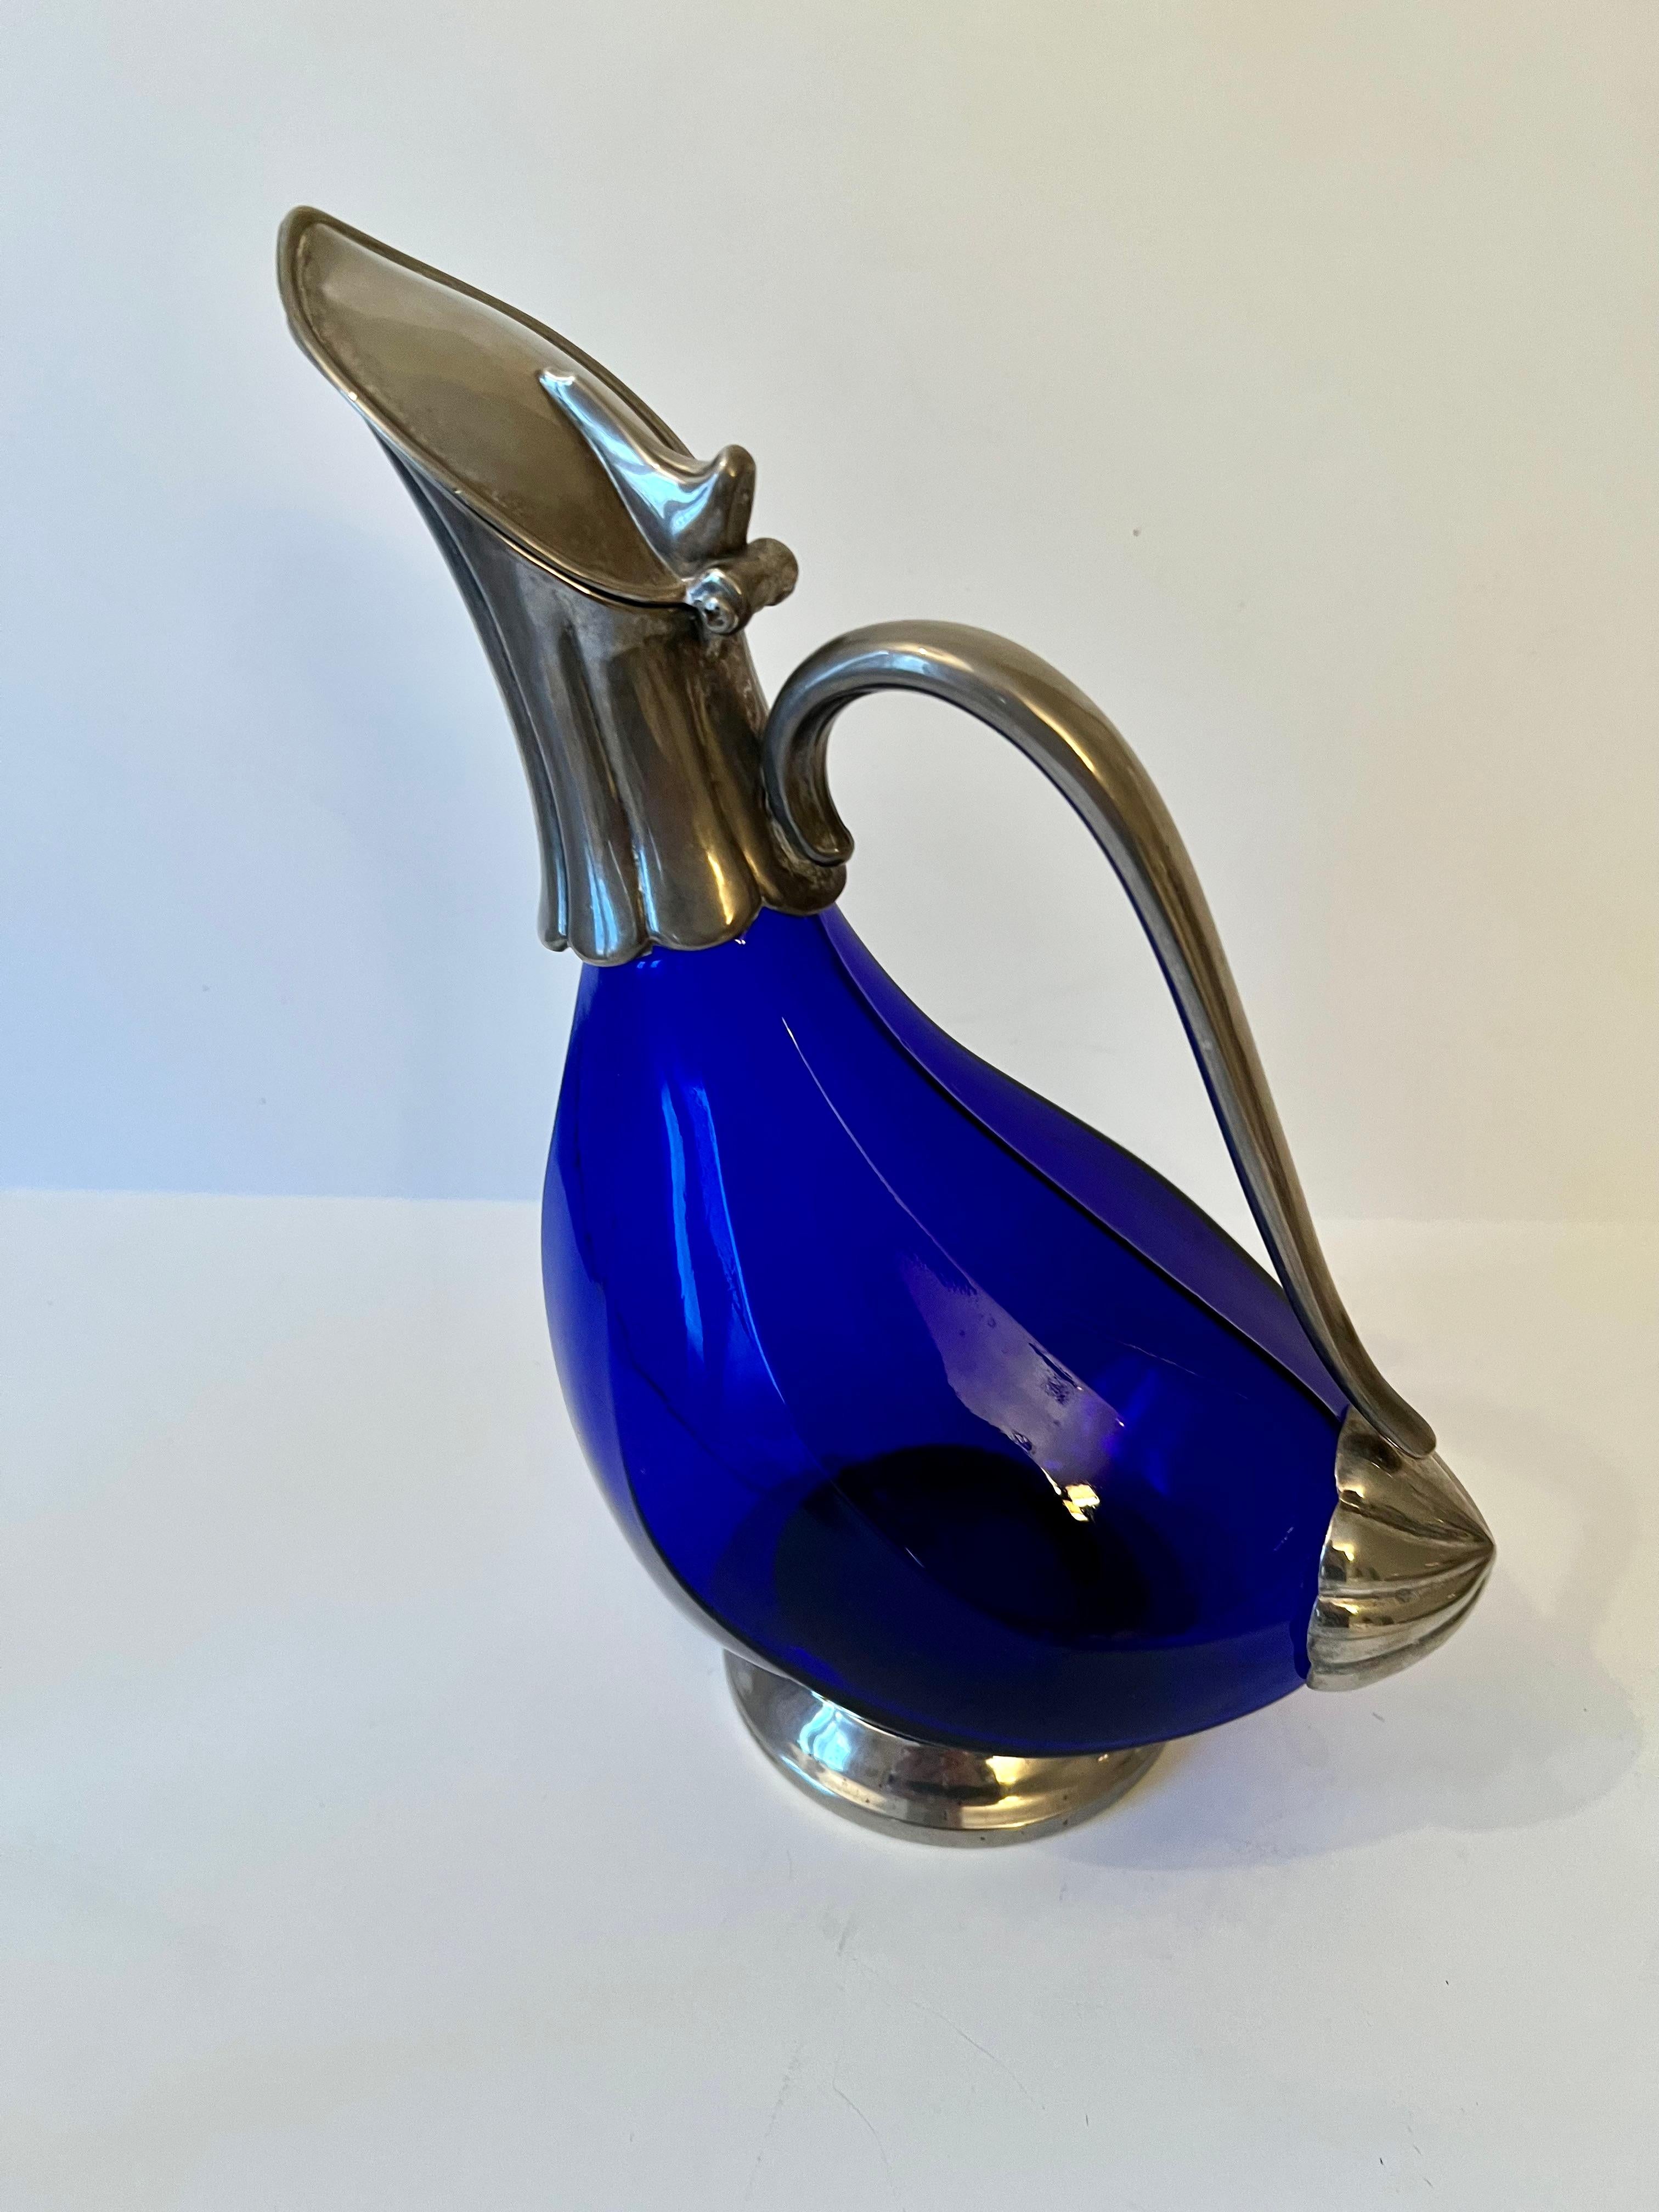 A lovely cobalt blue decanter with sliver base, handle and hinged lid. A compliment to any bar or table setting - the blue is a stunning color. In very nice vintage condition.